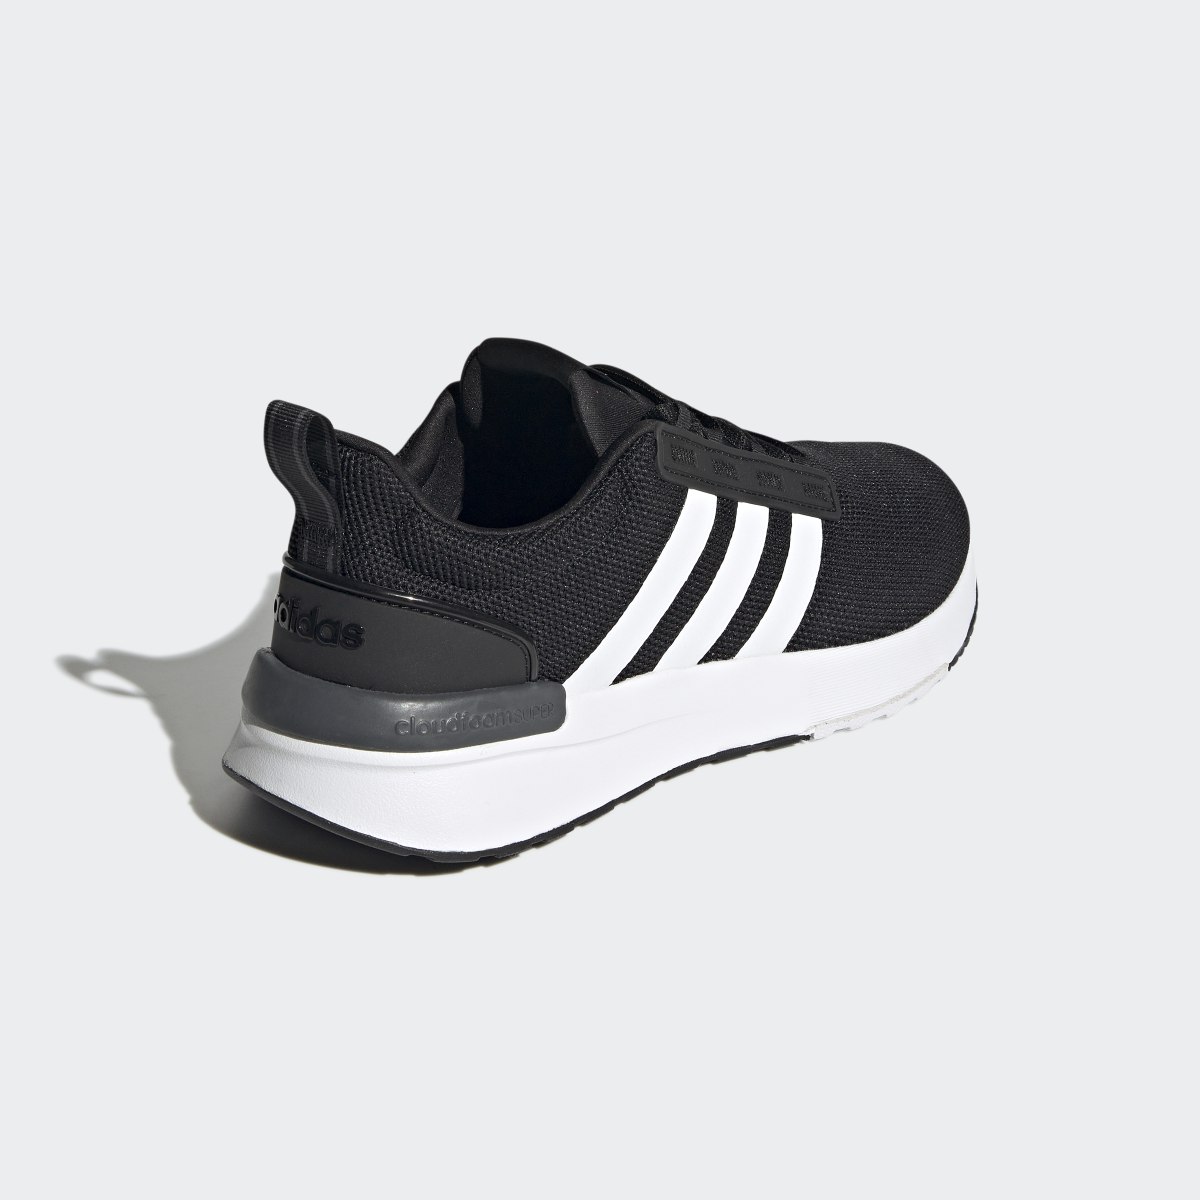 Adidas Racer TR21 Wide Shoes. 6